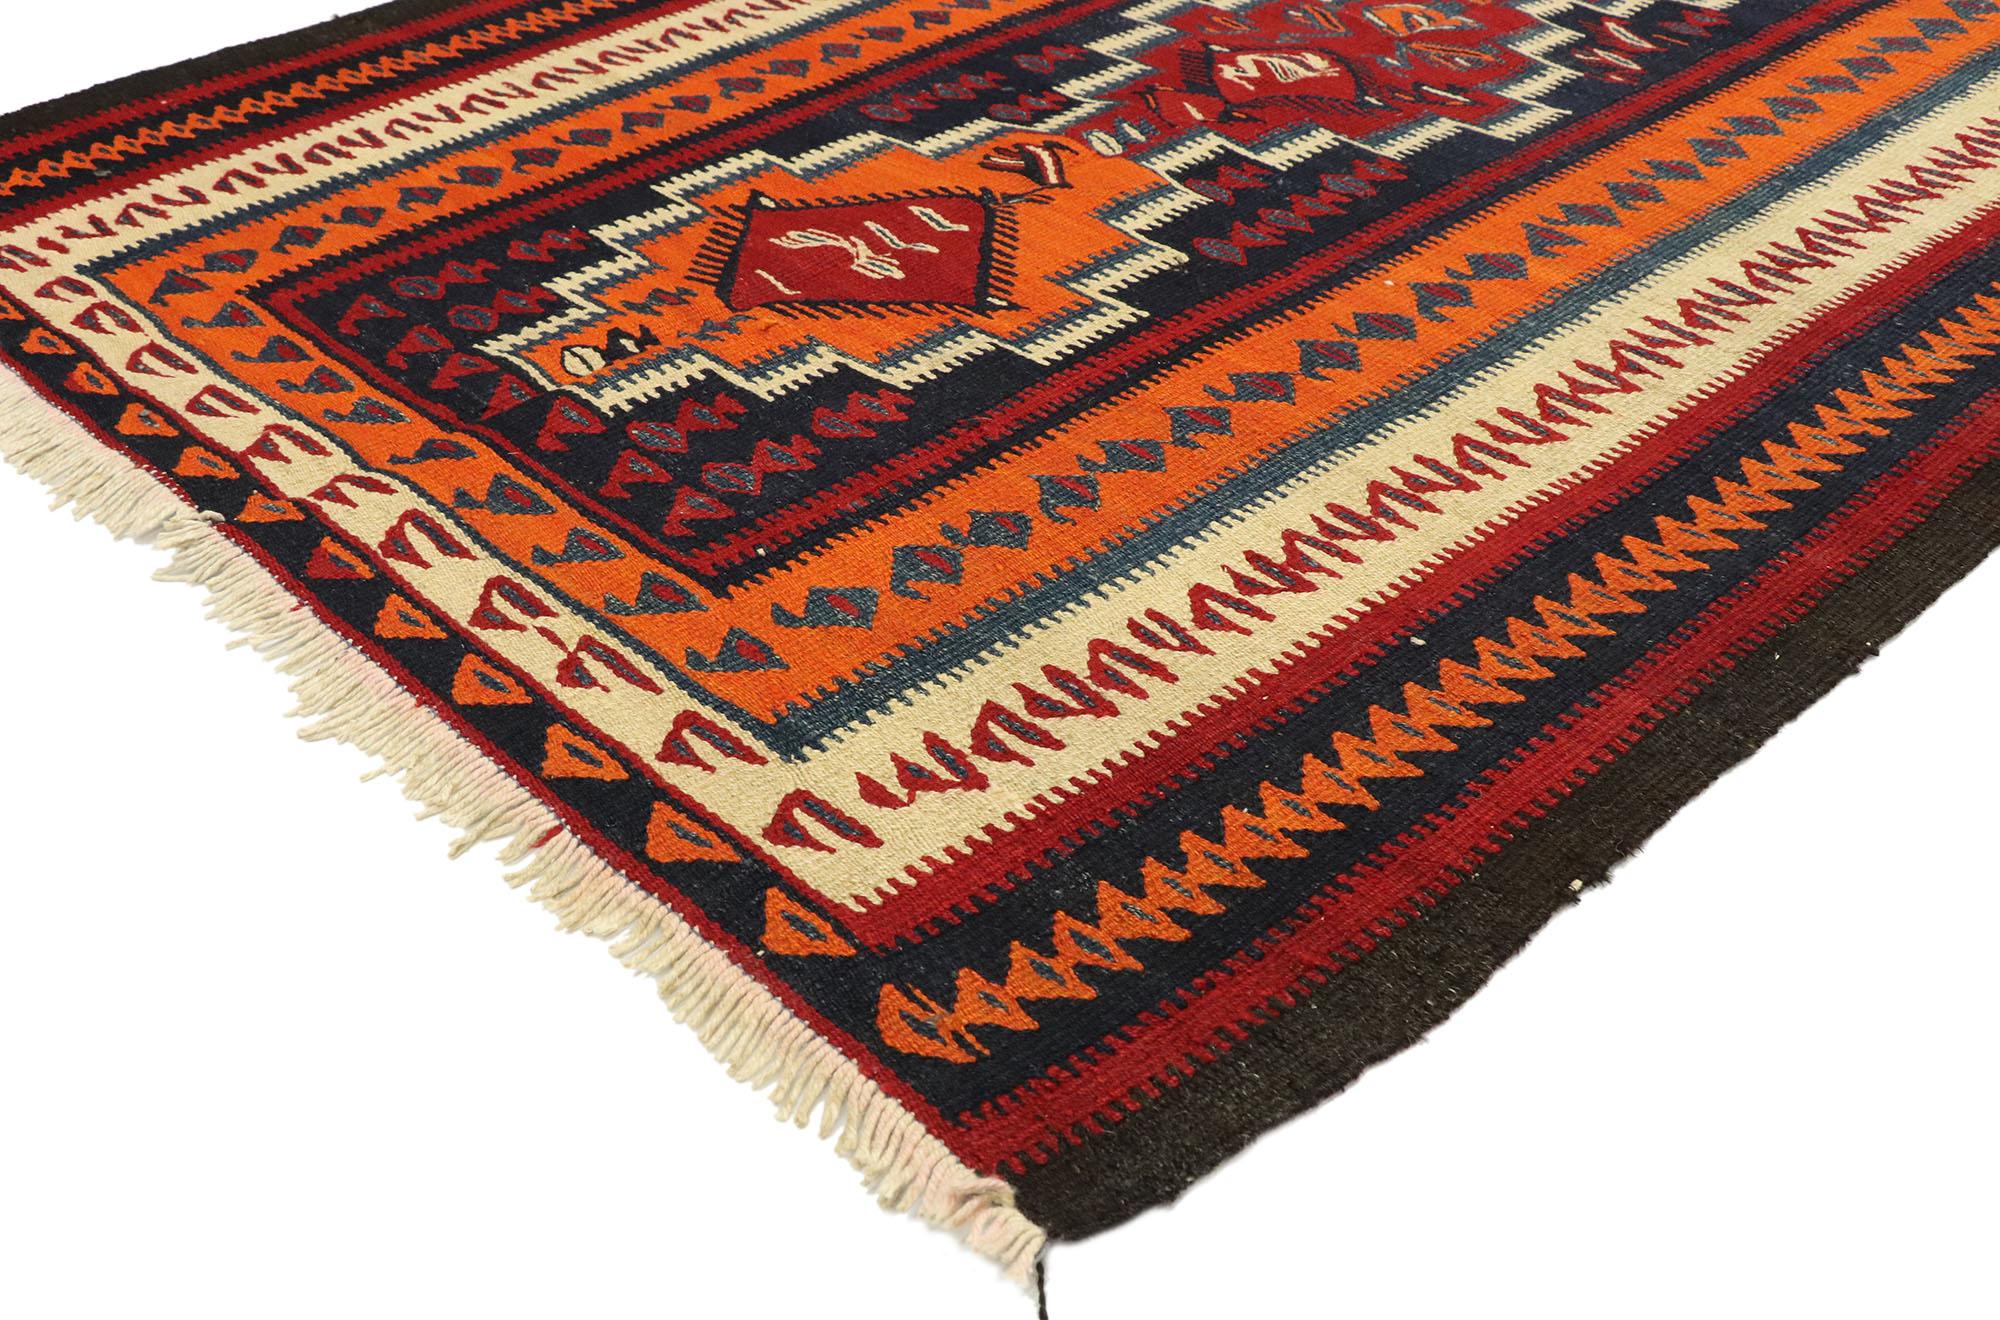 70469, vintage Persian Bijar Kilim rug with modern Northwestern tribal style. With its bold expressive design, incredible detail and texture, this vintage Persian Bijar kilim rug is a captivating vision of woven beauty. It features an all-over